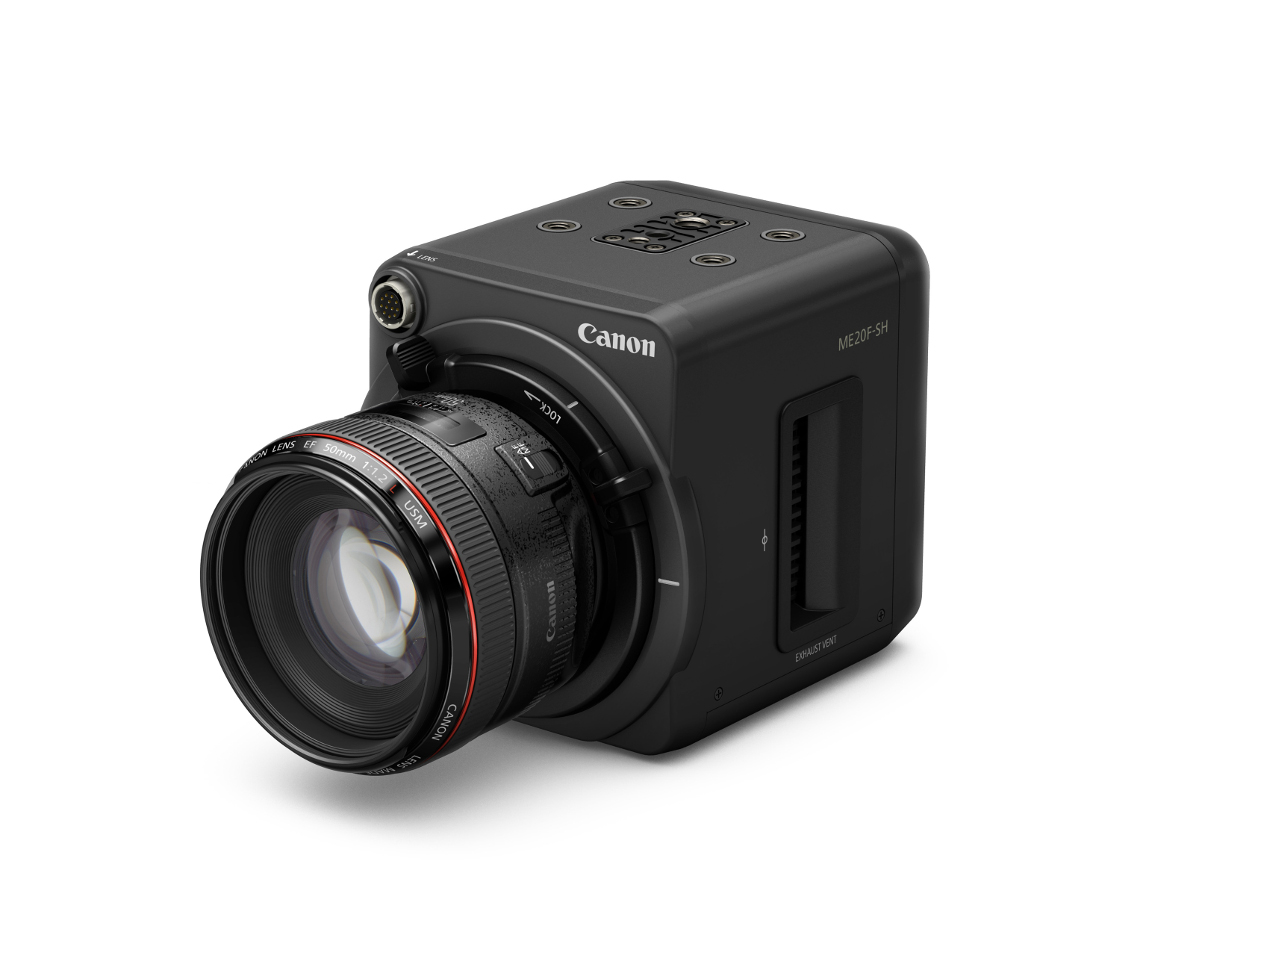 Canon Low Light ME20F-SH Camera low price discount - SPI Corp